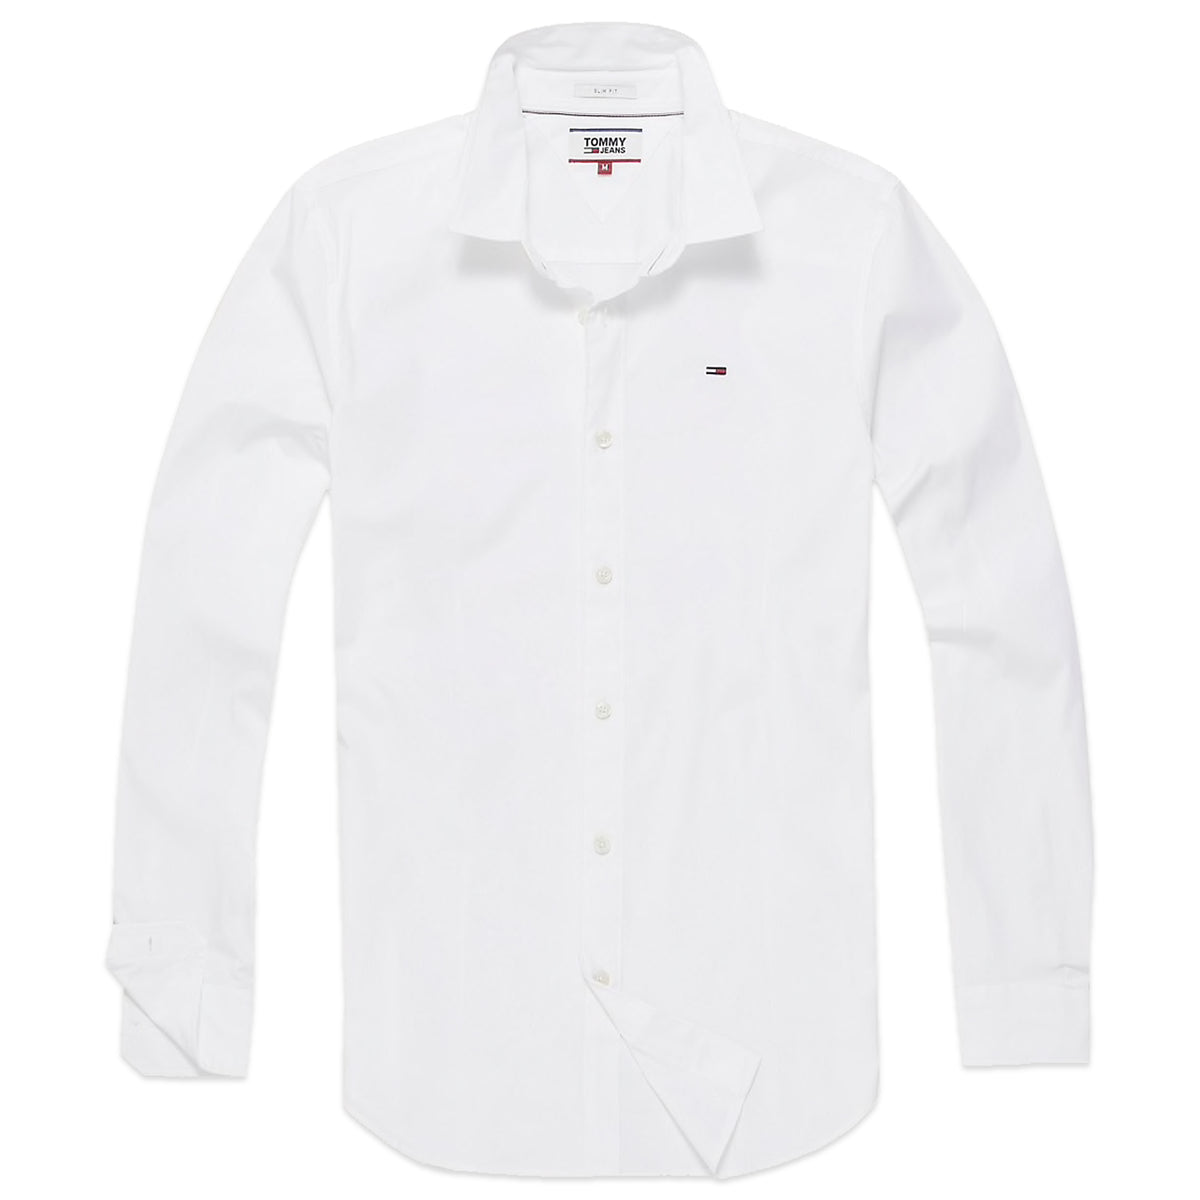 tommy hilfiger white long sleeve